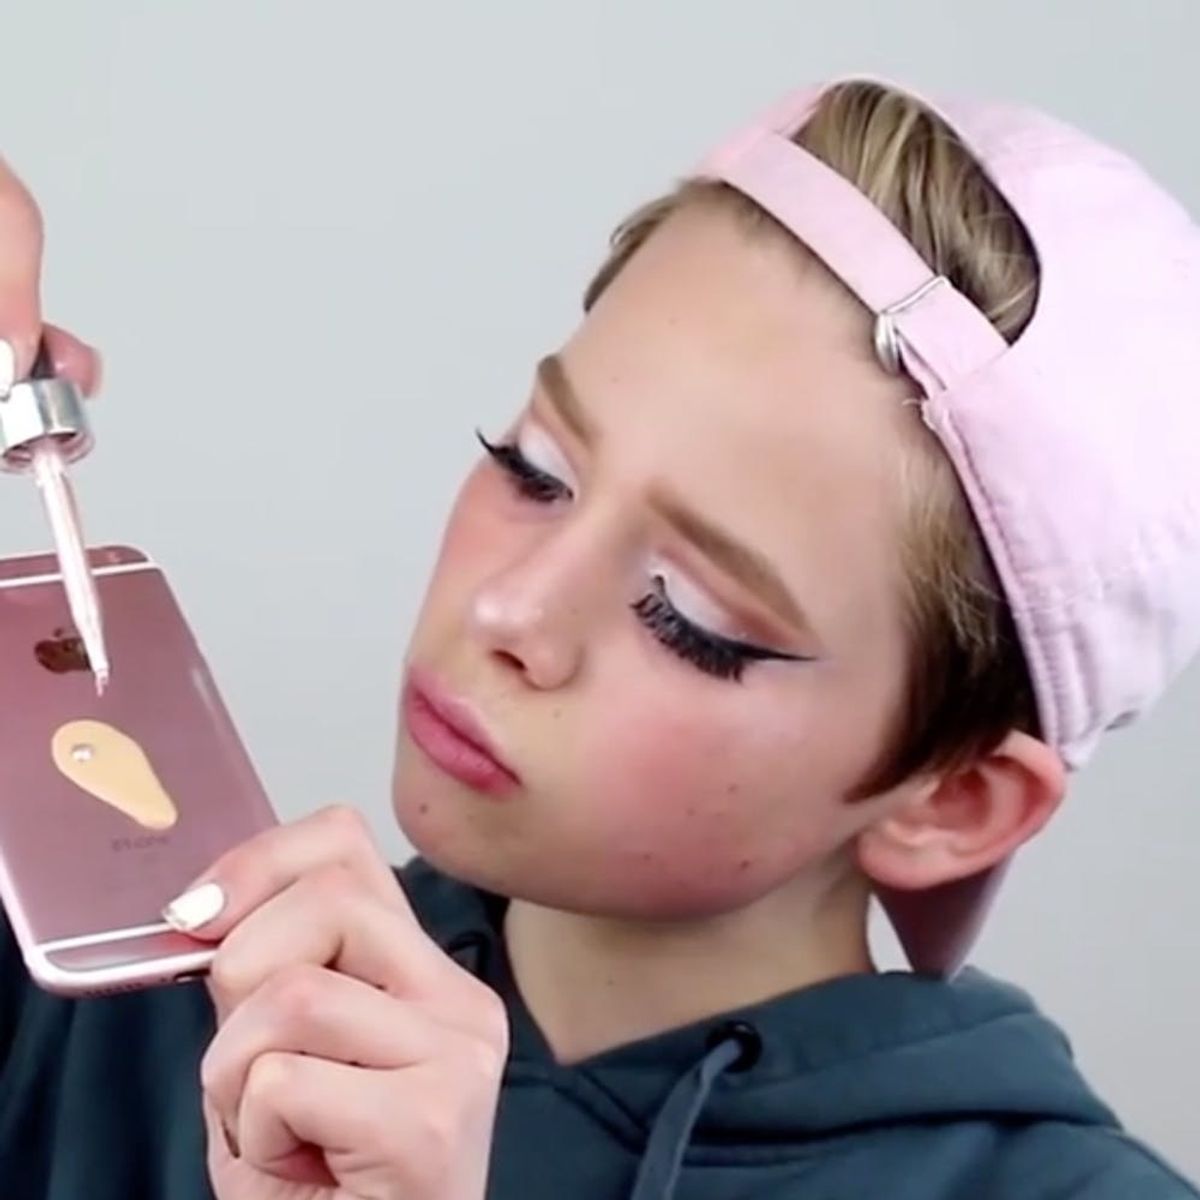 Instagrammers Are Using Their iPhones to Blend Their Makeup